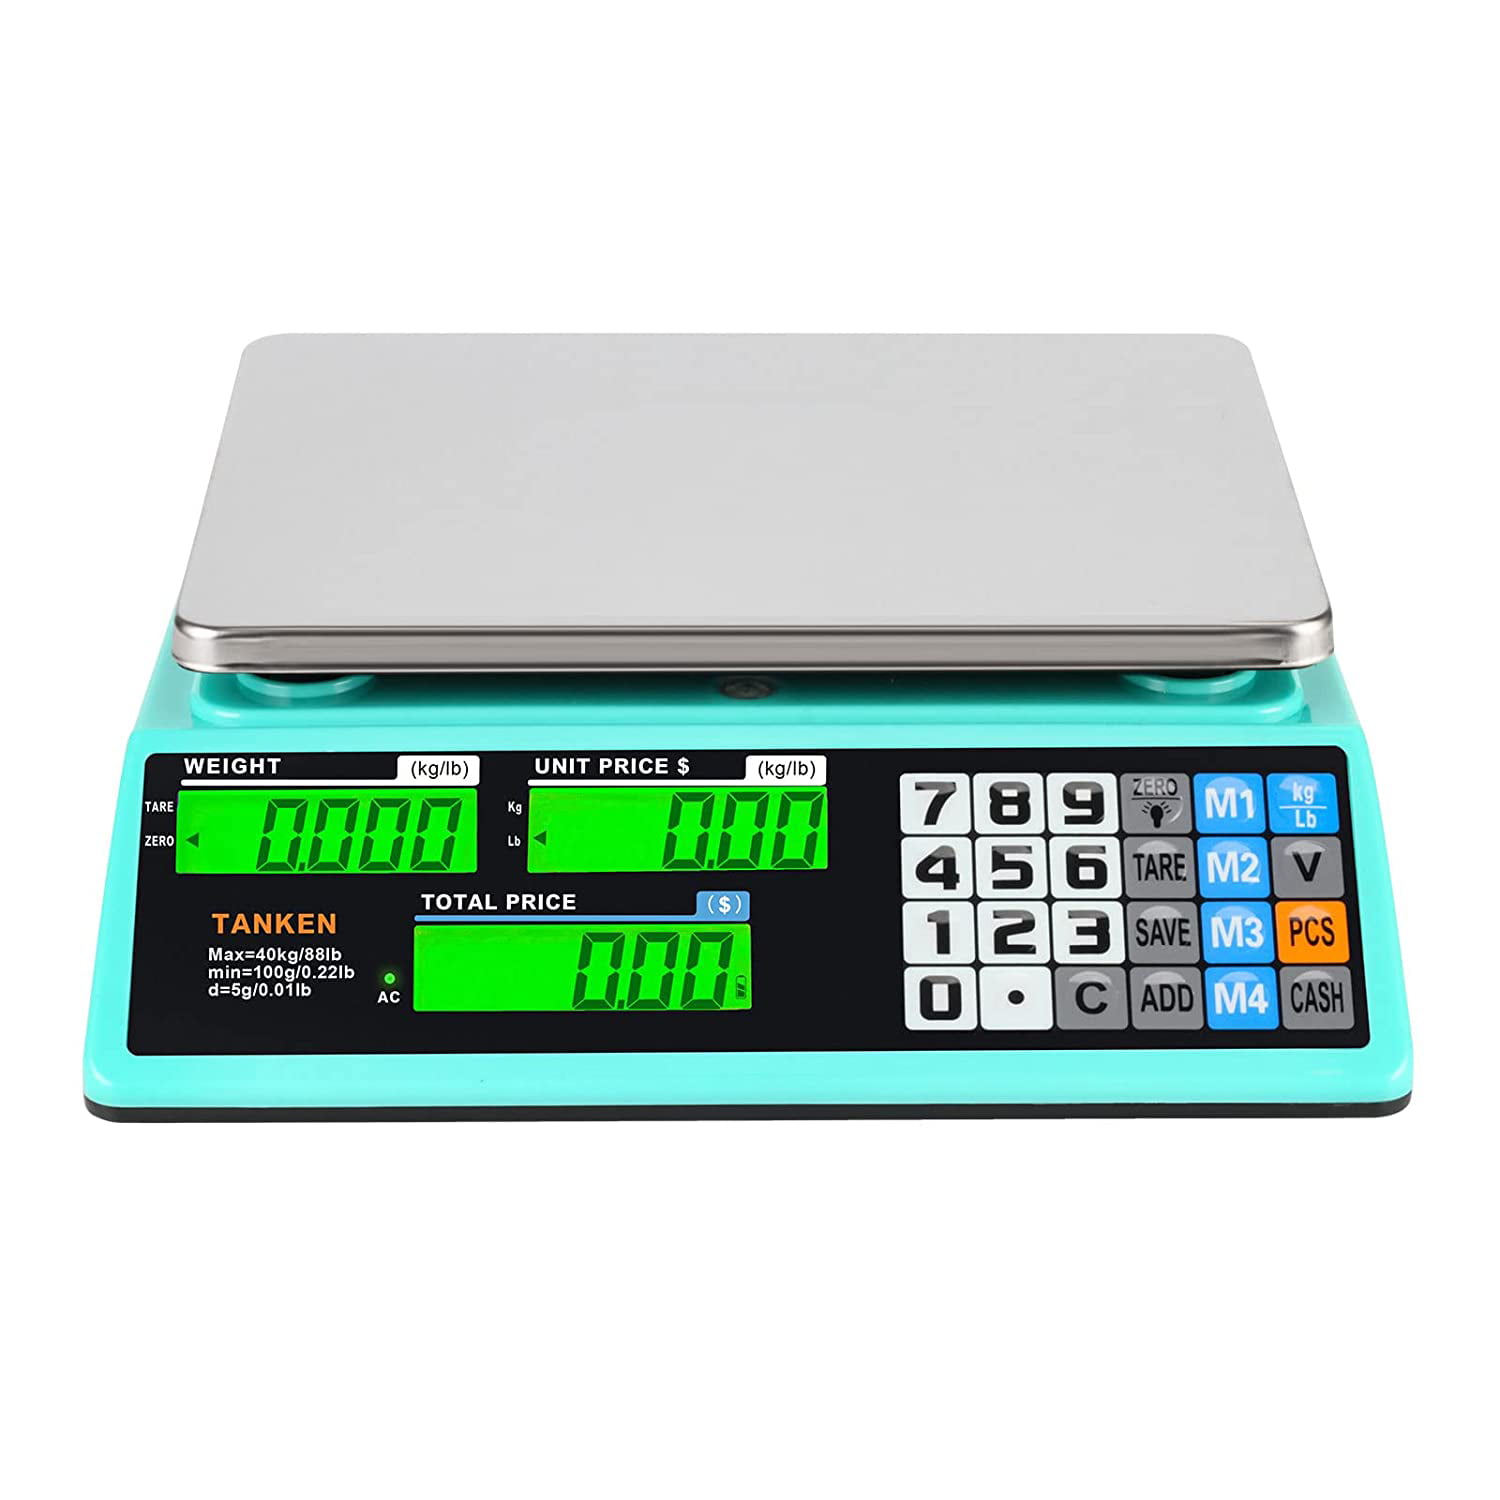 88LB 40KG Electronic Price Computing Scale | Digital Deli Food Produce  Weight Scales Counting Equipment with LCD Display for Retail Outlet Store